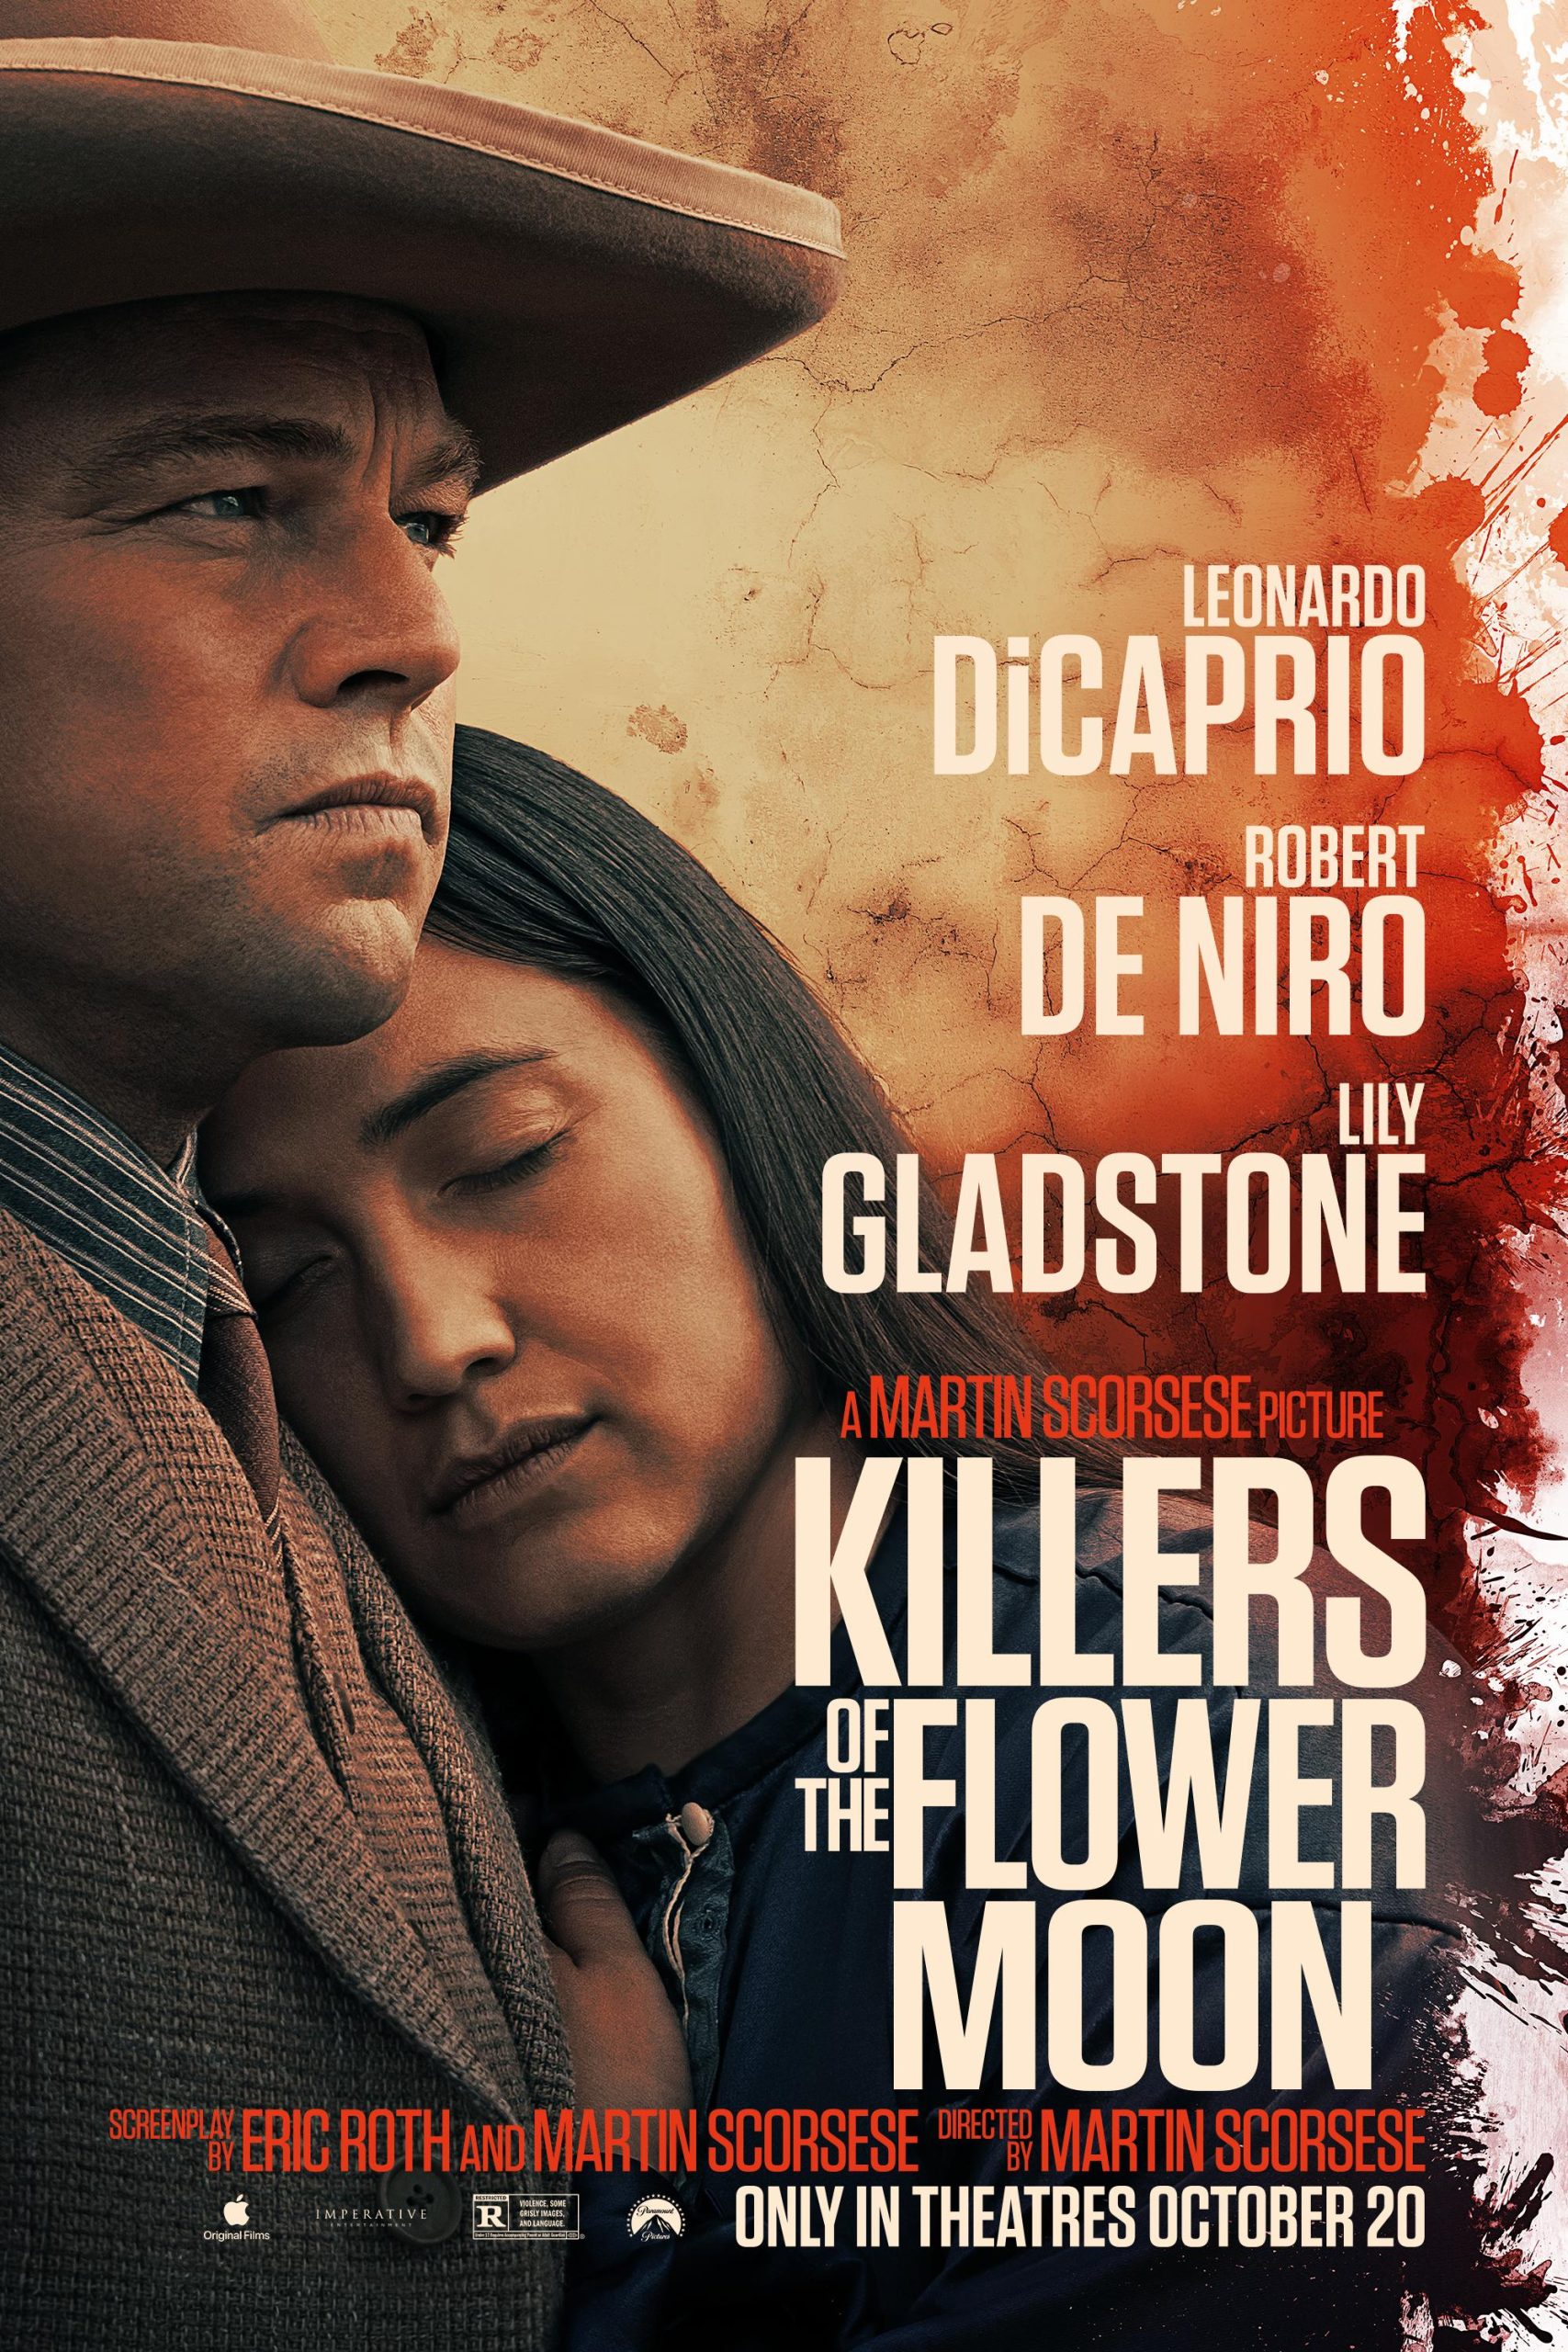 Movie Poster: Killers of the Flower Moon